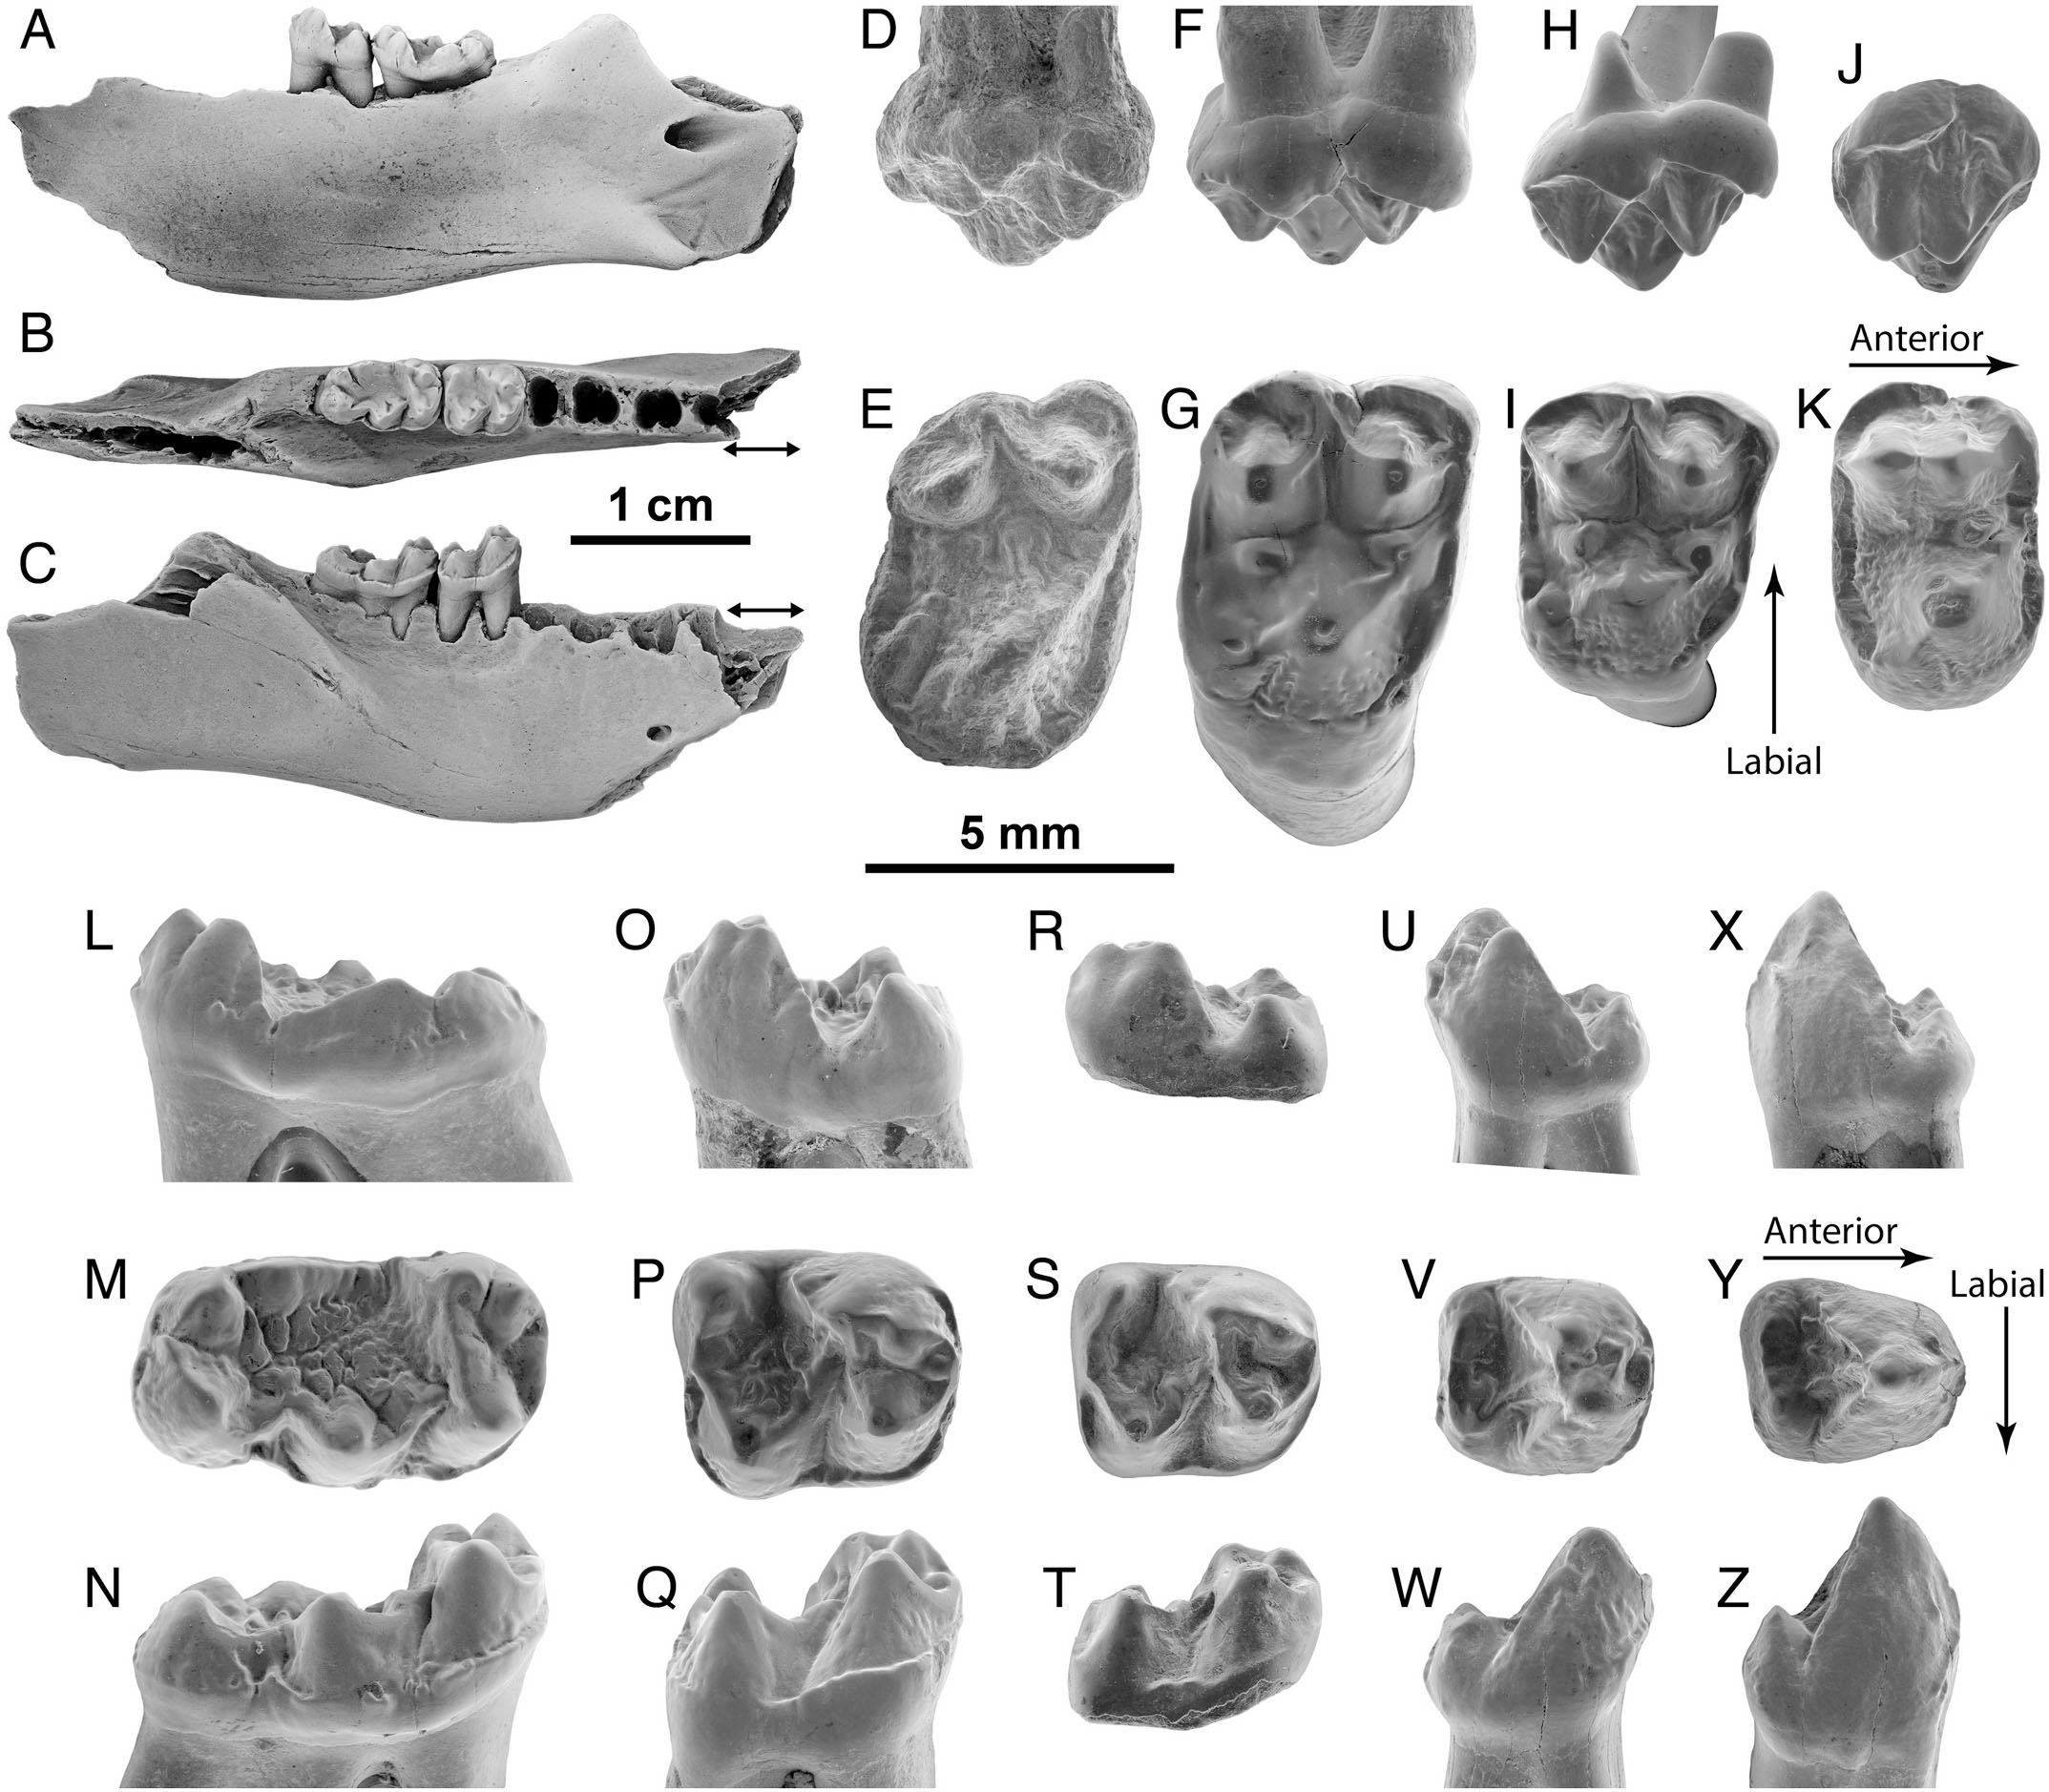 Plesiadapid Mammals From The Latest Paleocene Of France Offer New Insights On The Evolution Of Plesiadapis During The Paleocene Eocene Transition